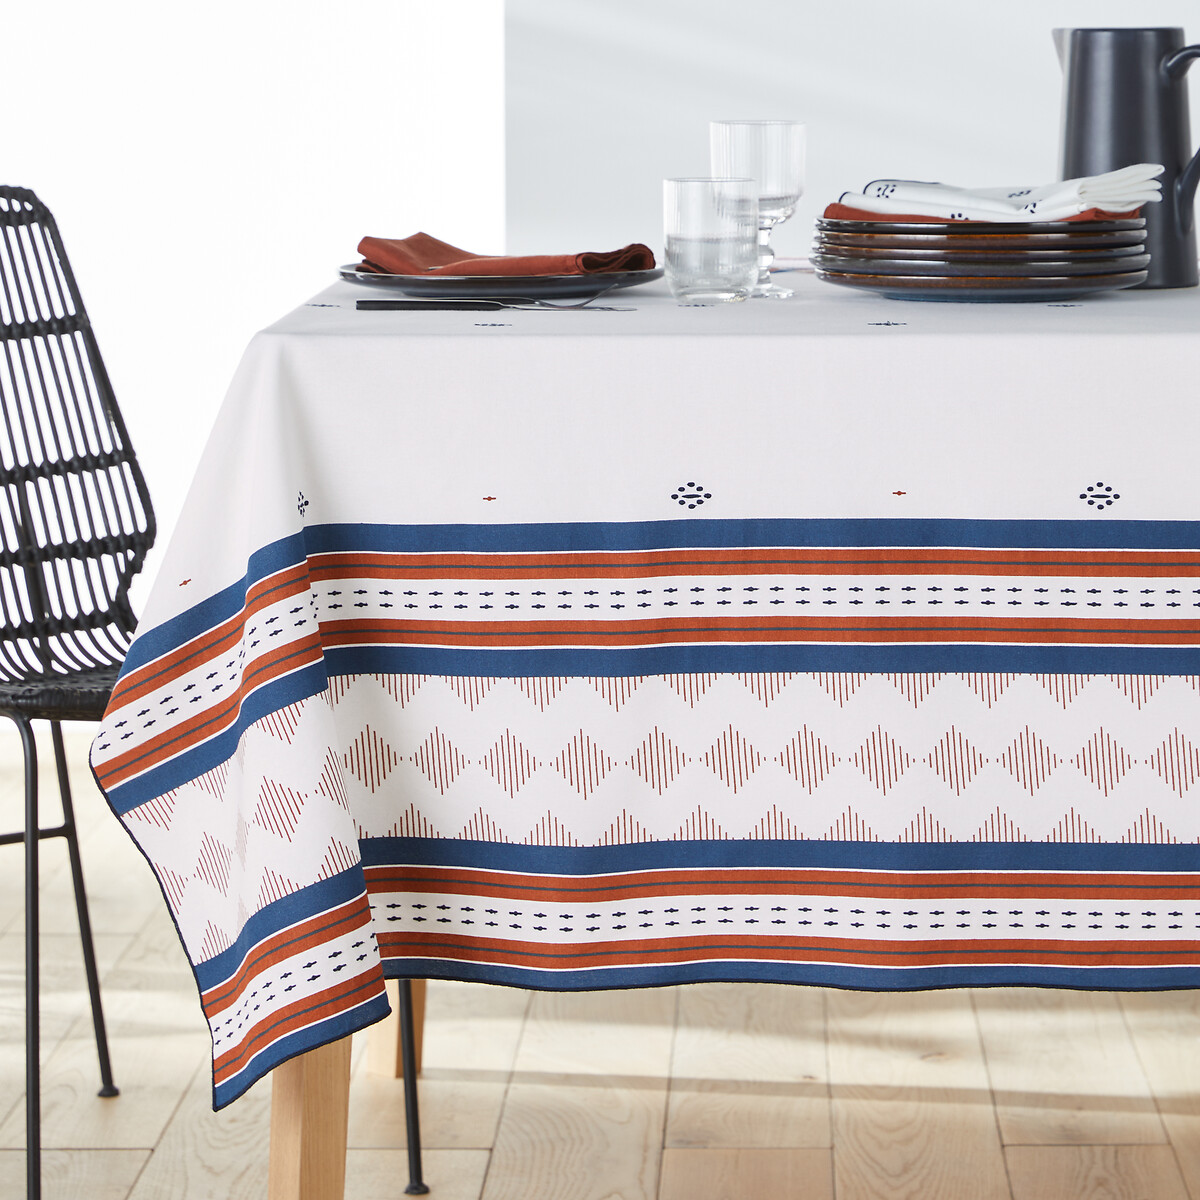 Maliau Patterned Embroidered 100% Cotton Tablecloth